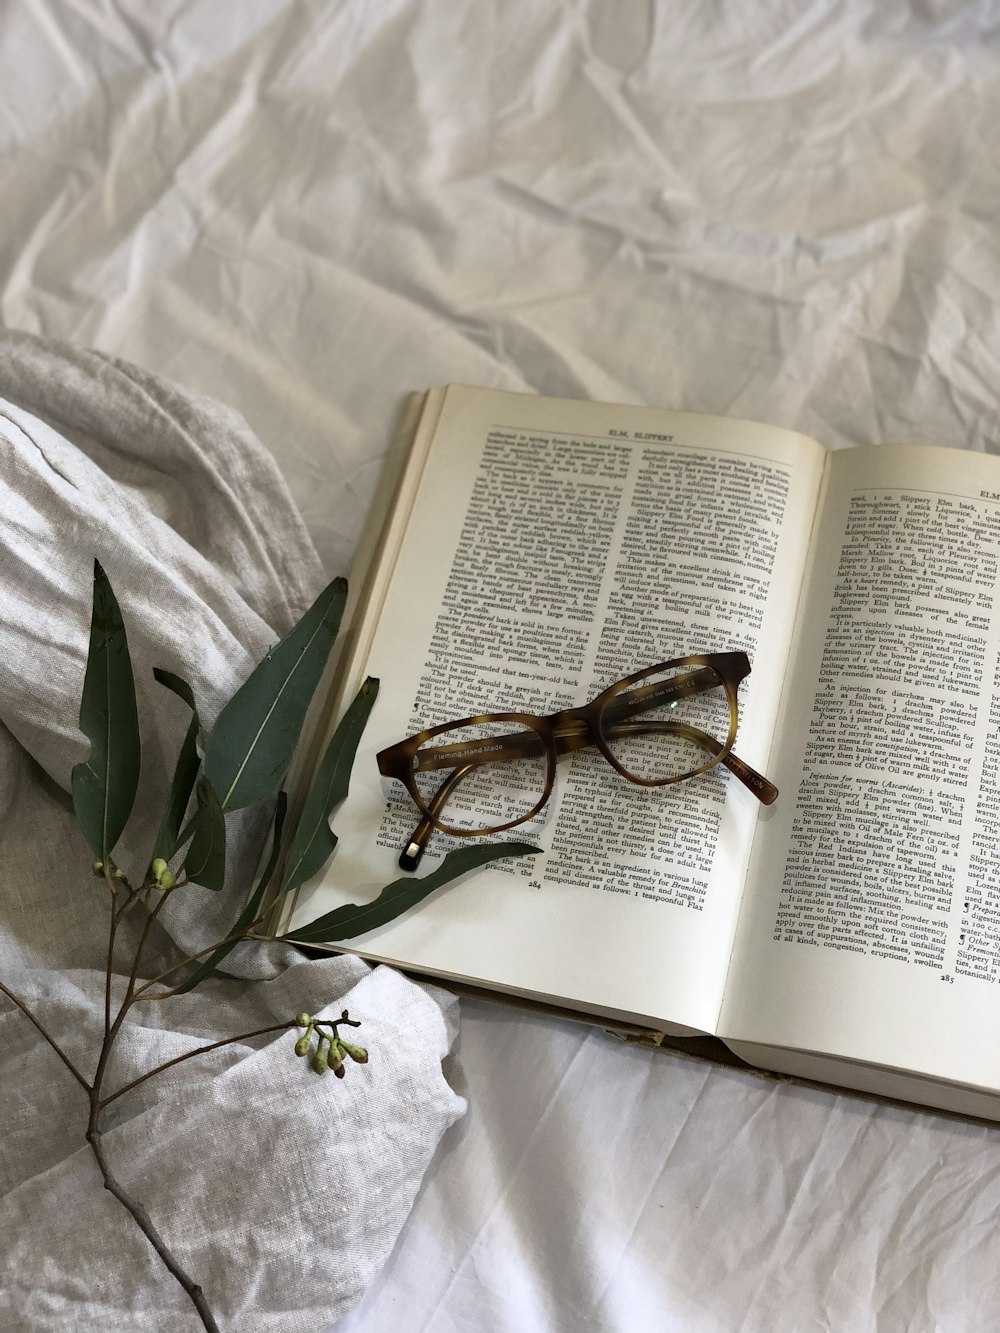 eyeglasses on top of book page beside green leafed plant